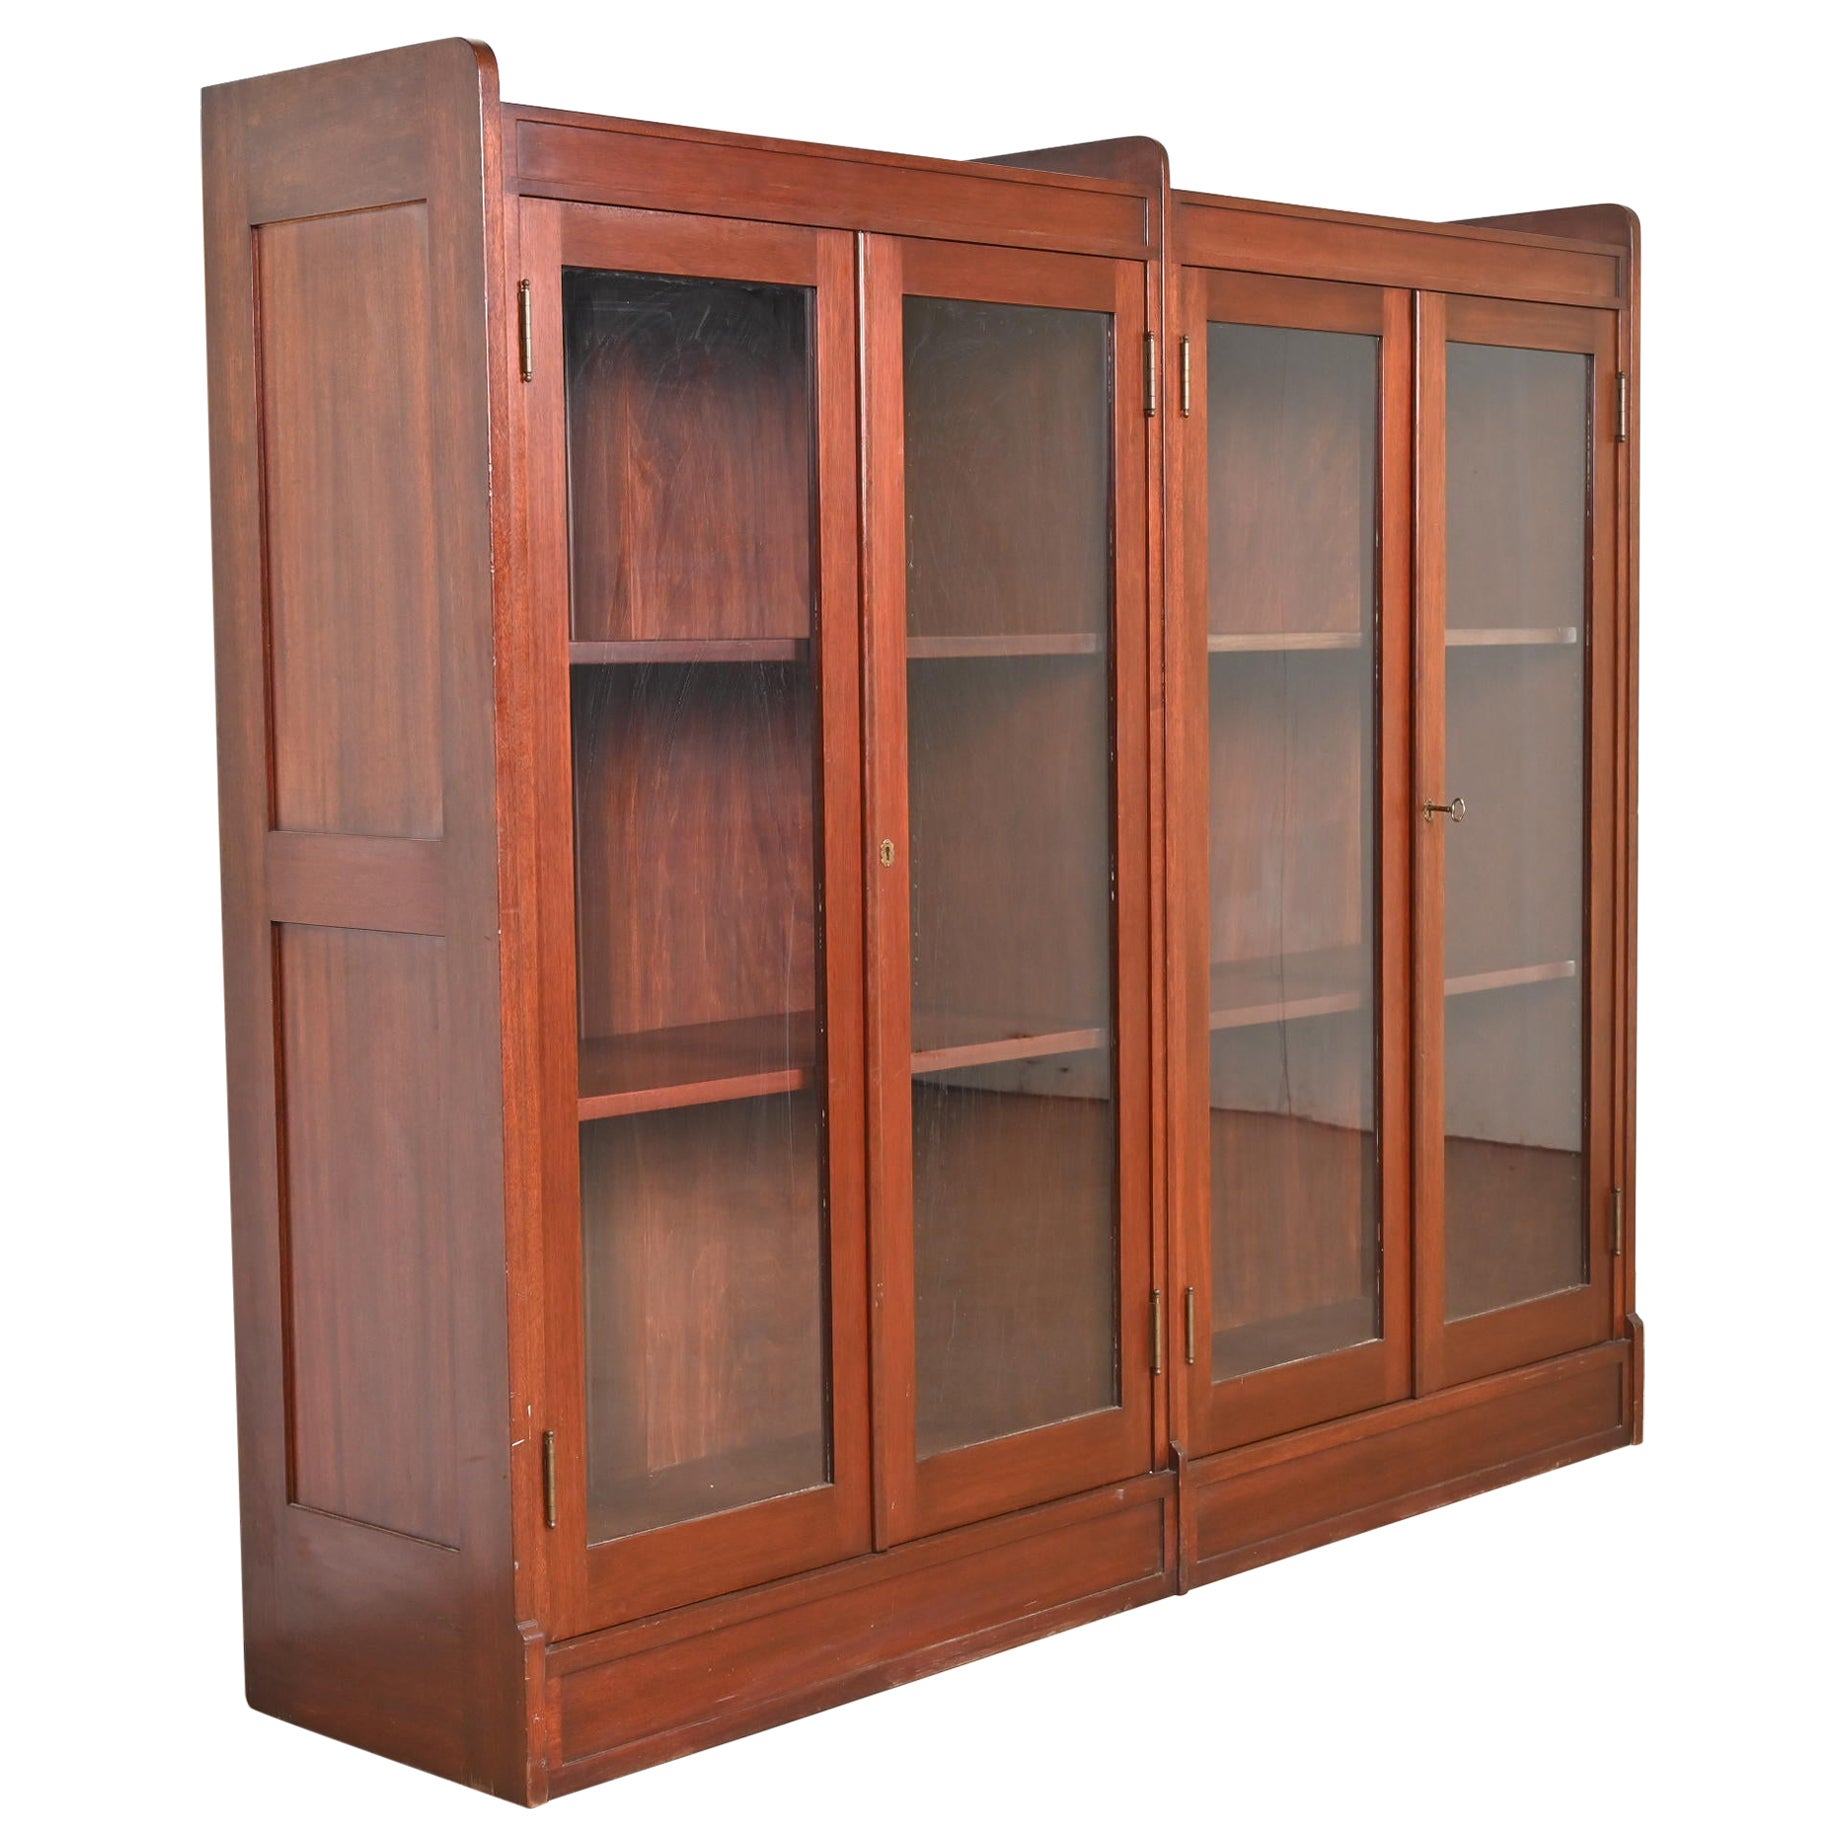 Antique Stickley Style Arts and Crafts Solid Mahogany Double Bookcase, 1920s For Sale